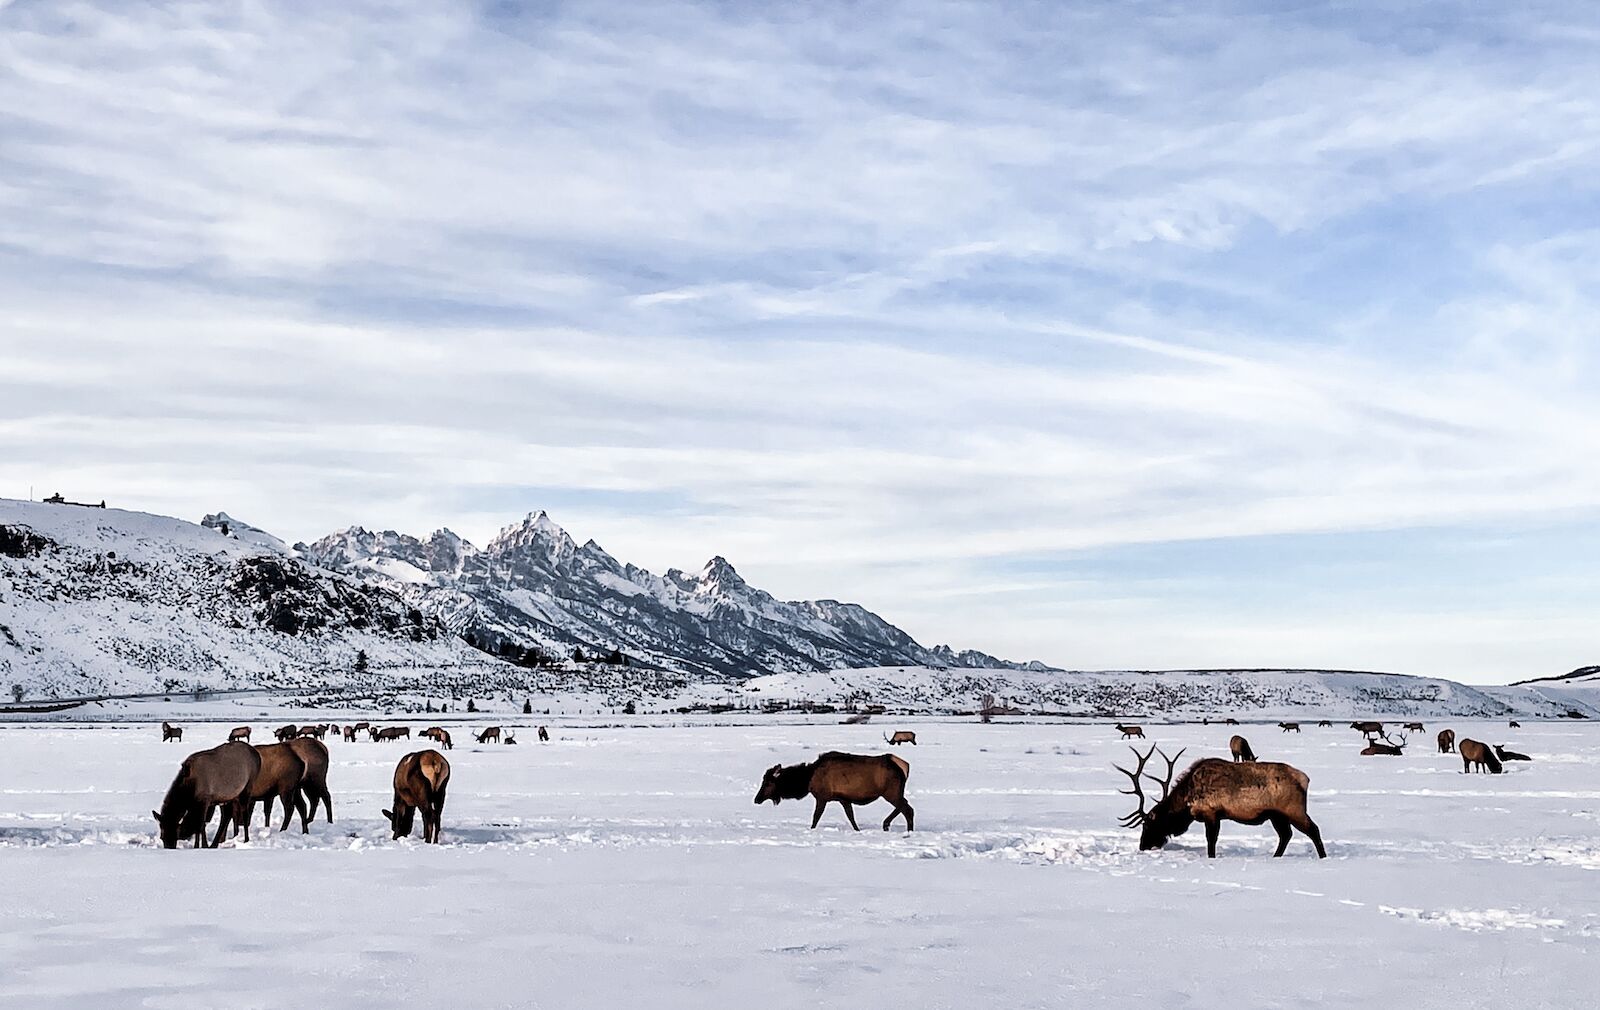 The National Elk Refuge suffers from far fewer overtourism issues on the weekdays